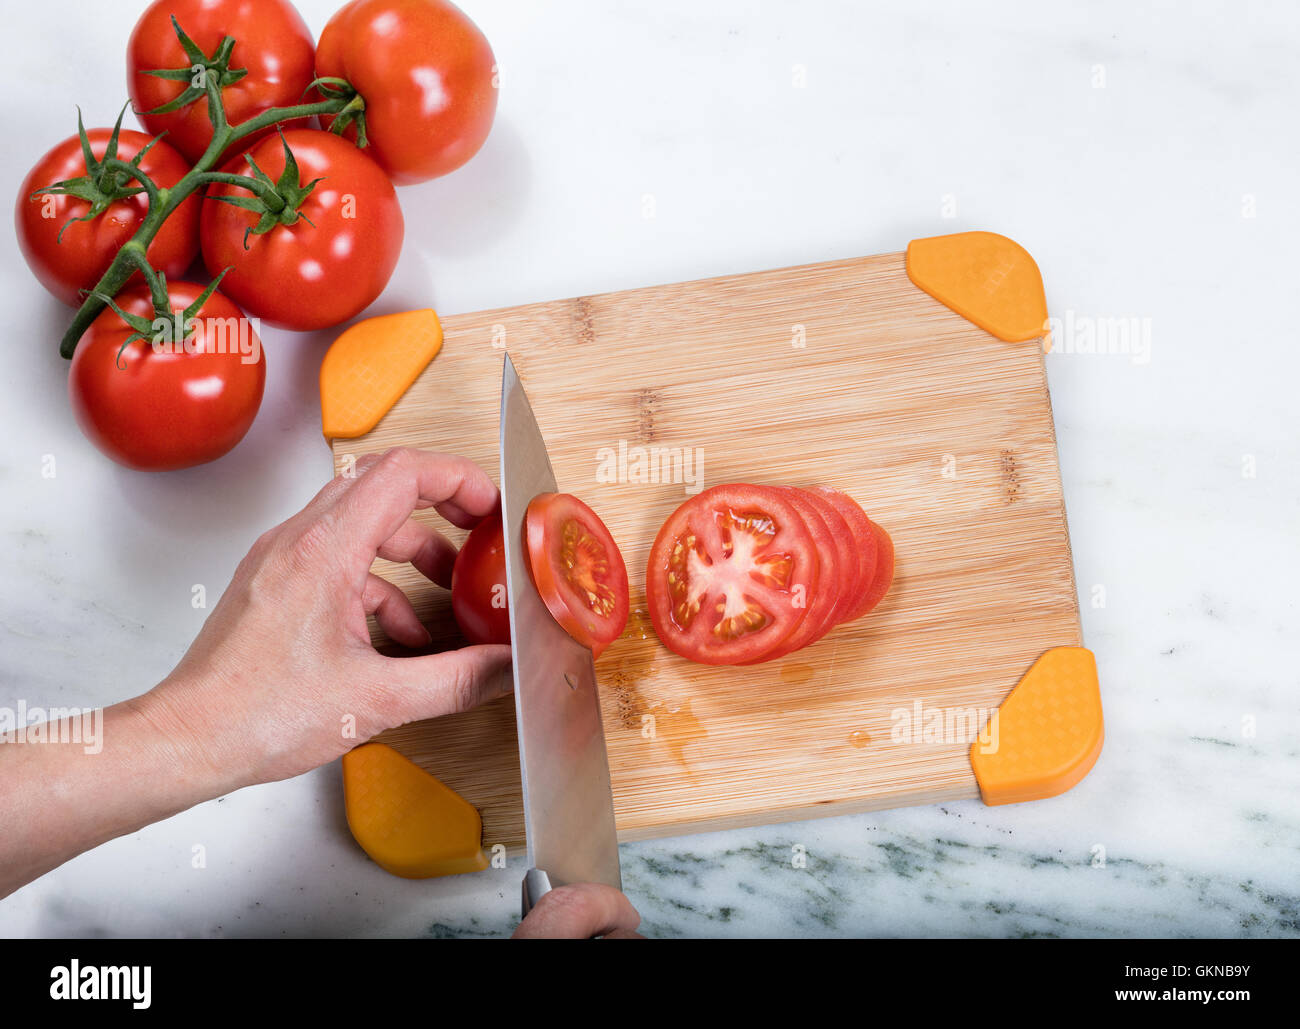 Overhead view of hand slicing a fresh garden tomato with large kitchen knife and whole tomatoes on natural bamboo cutting board. Stock Photo